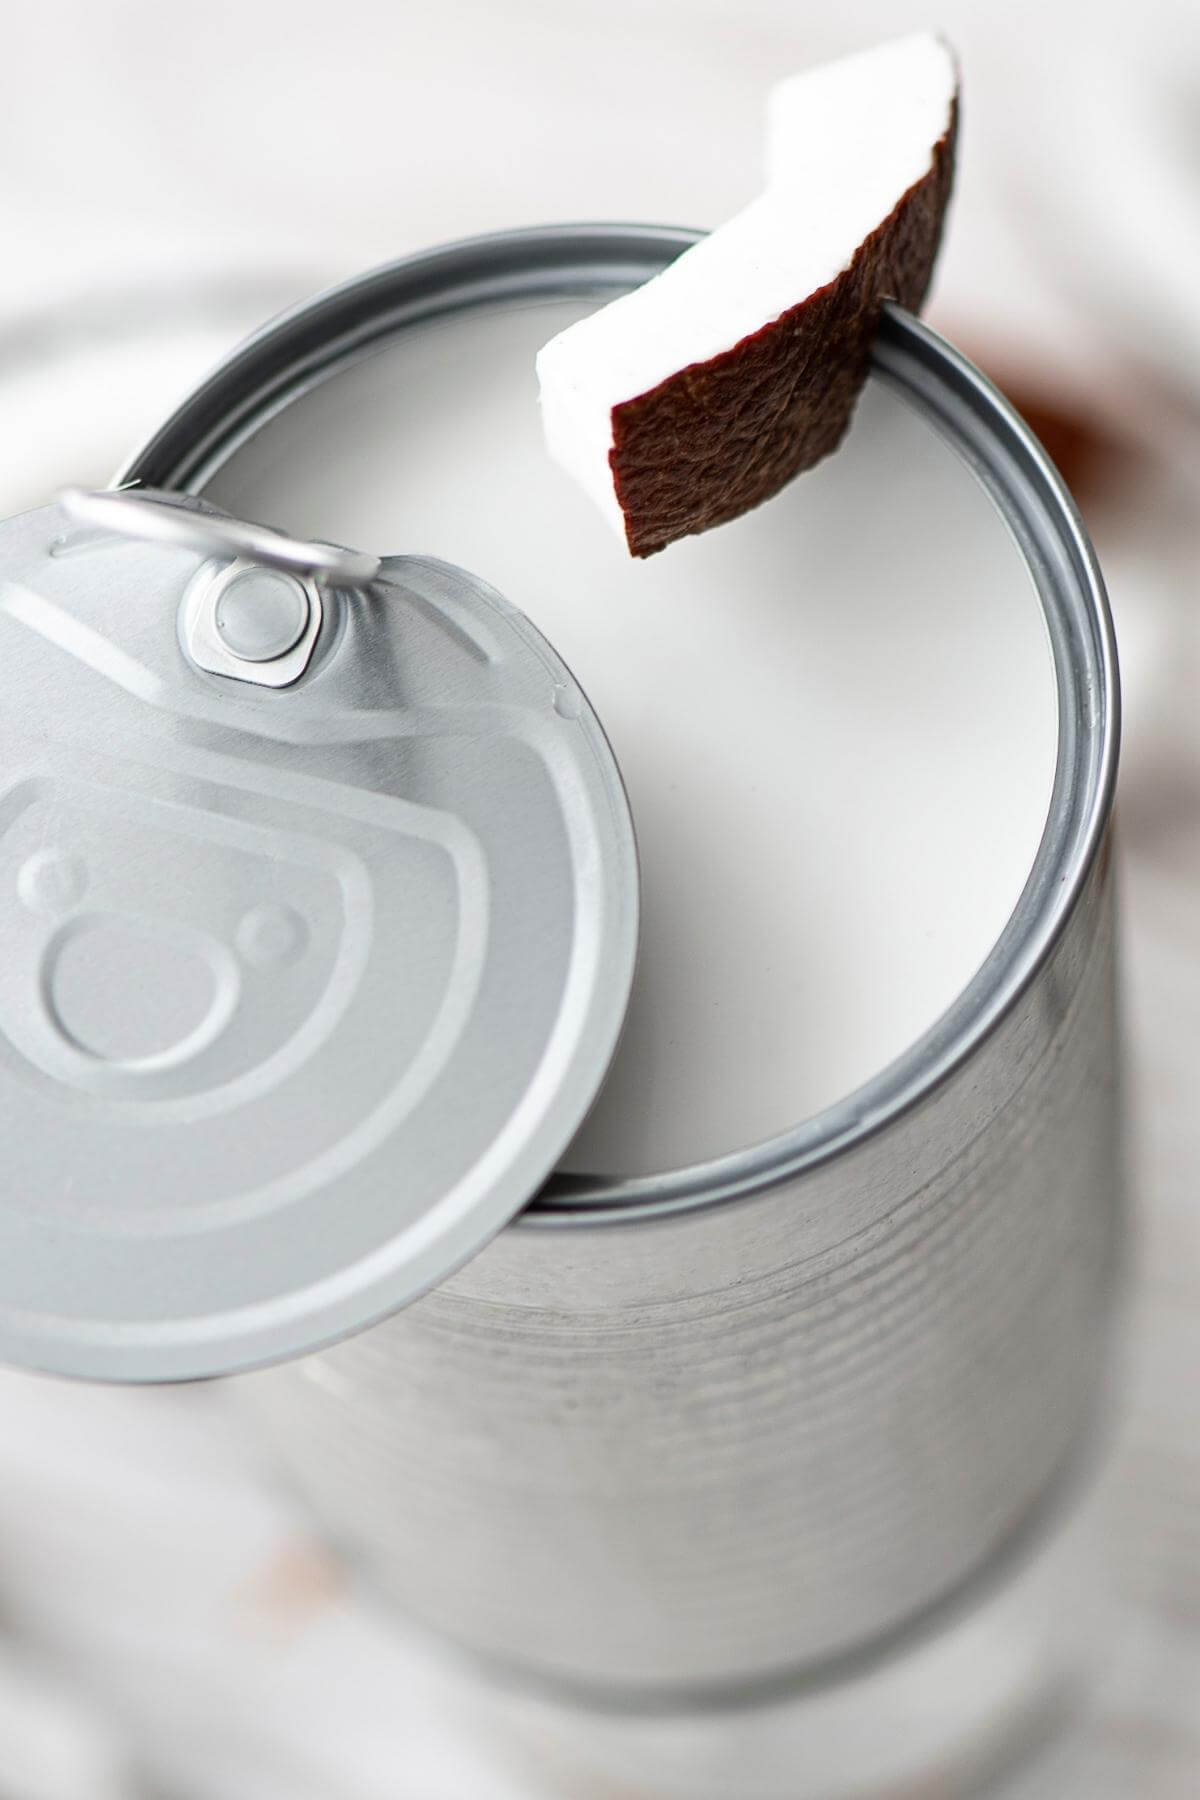 An open can of coconut milk.